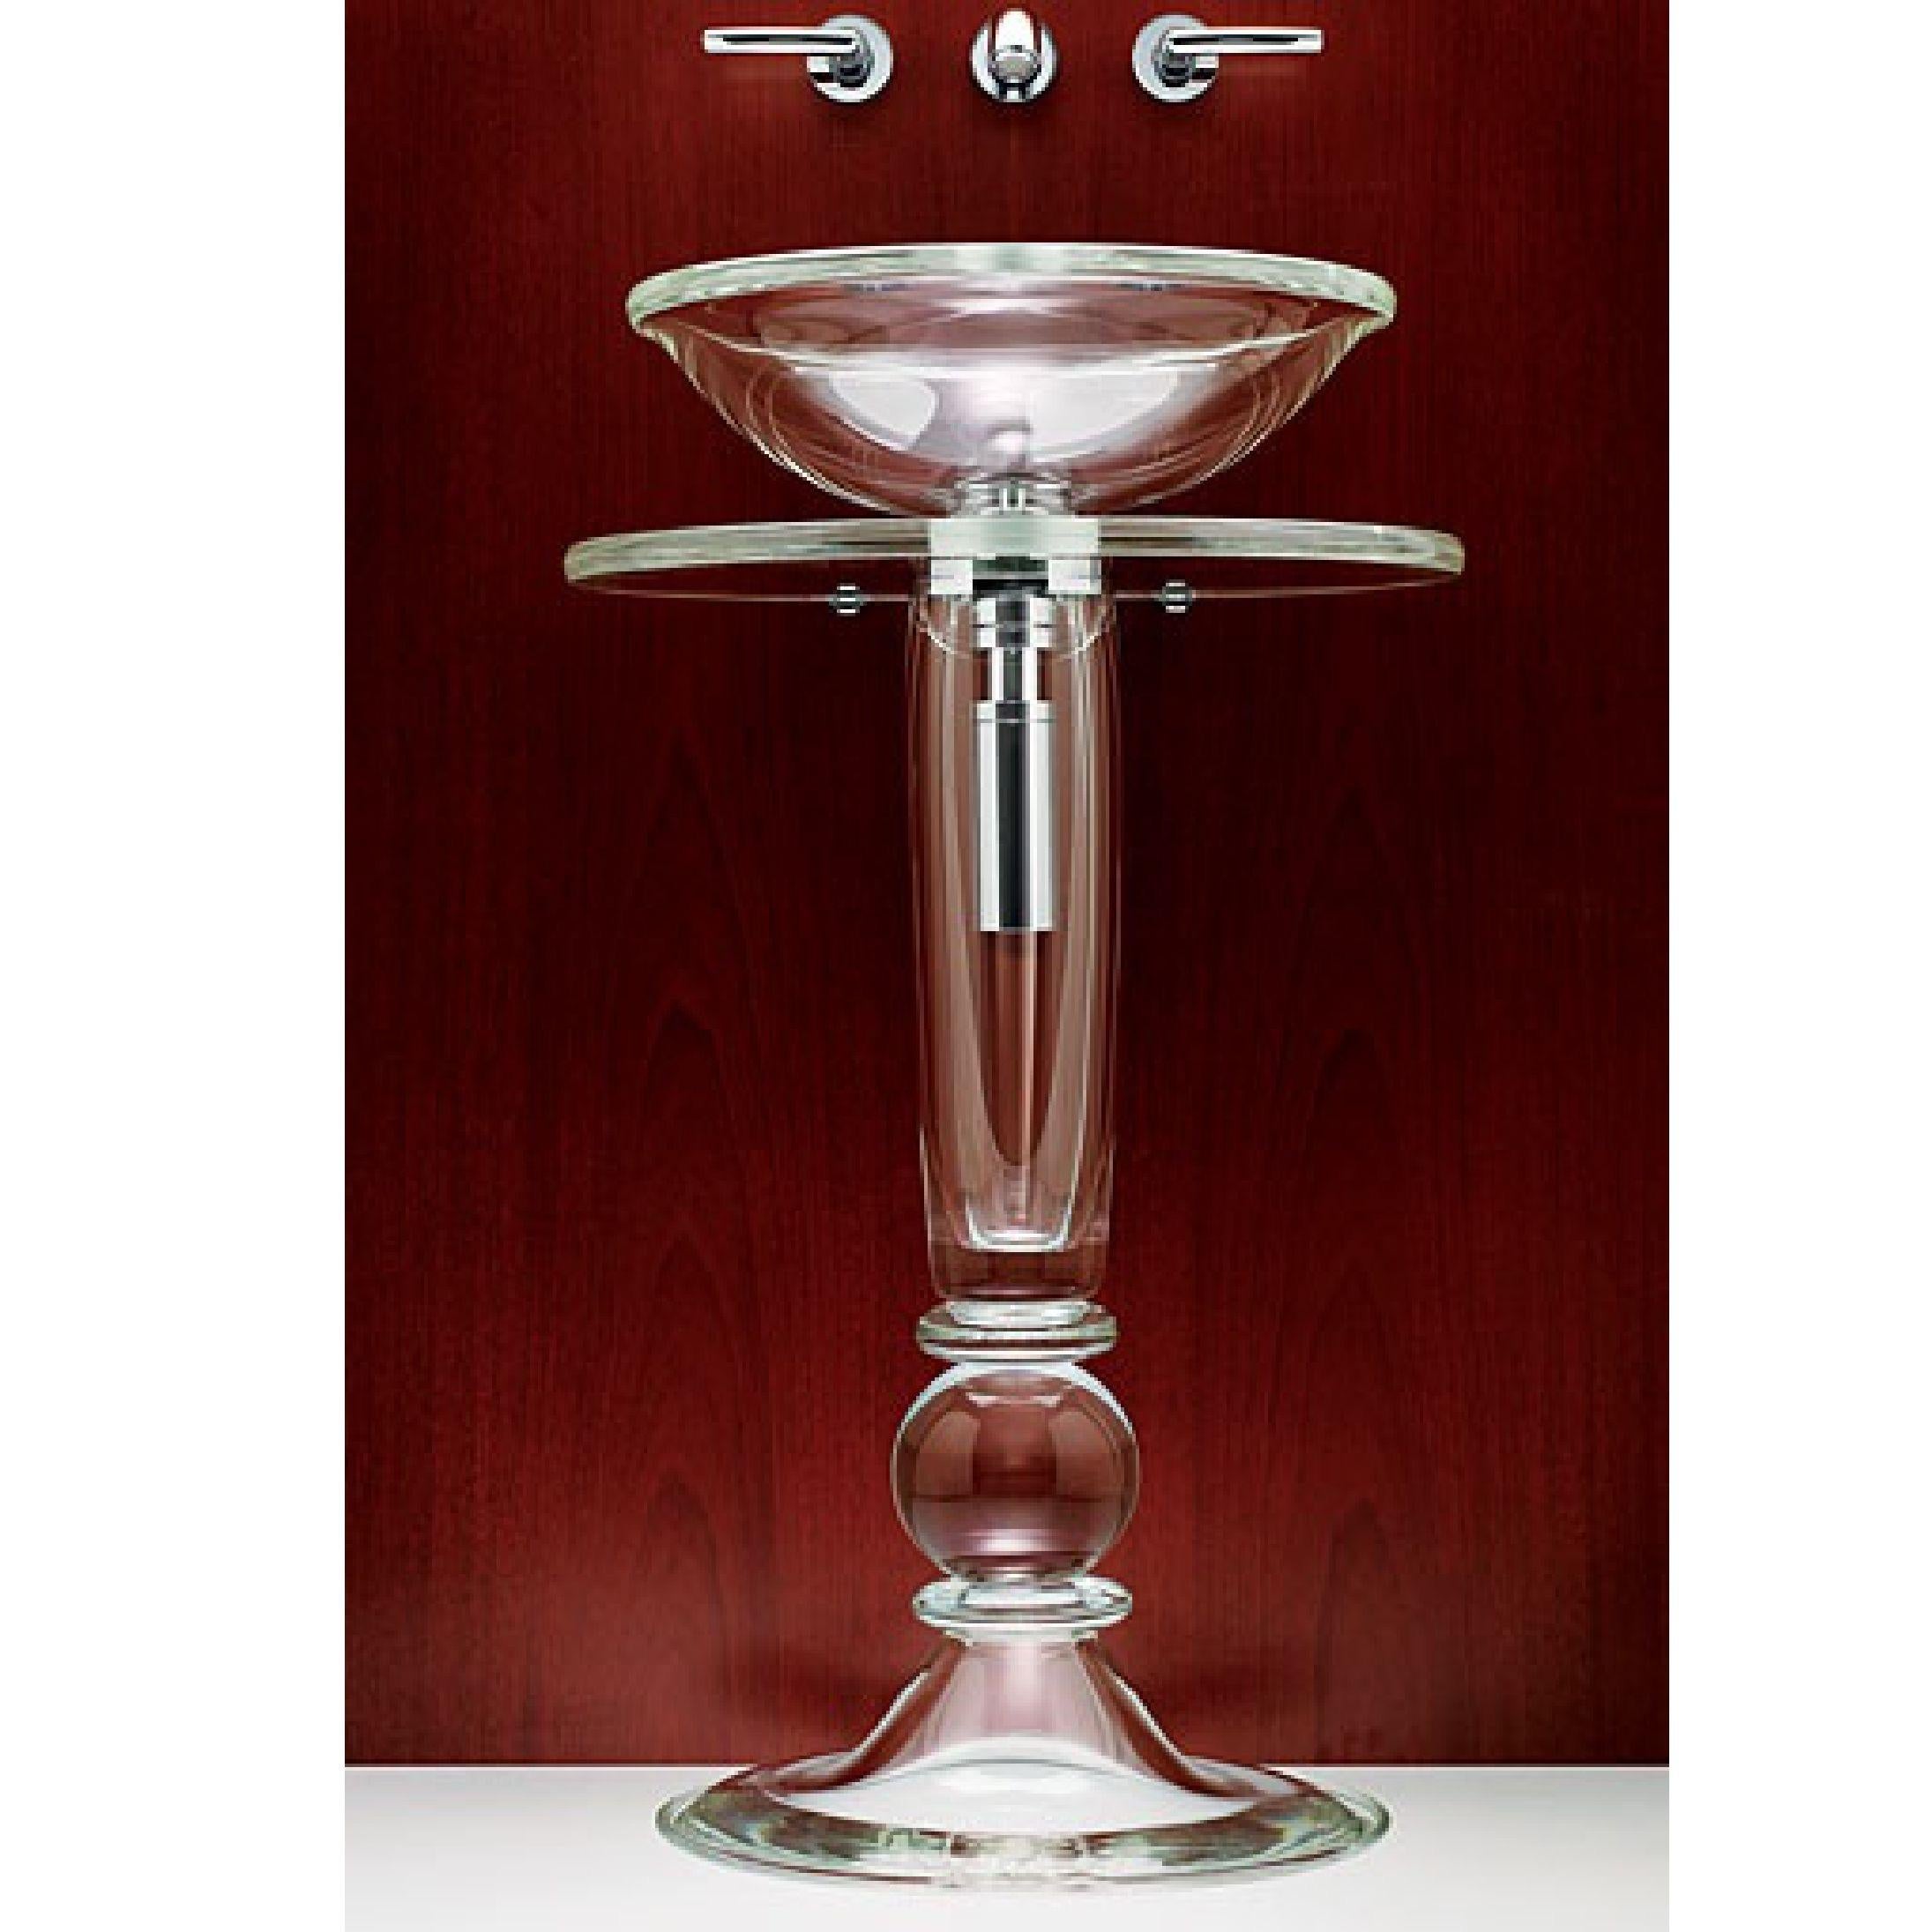 Vitraform Coppa crystal polished blown glass pedestal sink, vessel, custom. Each Coppa pedestal is mouth-blown and entirely unique. MSRP for this sculptural pedestal sink is over 16,800 USD. Includes P-trap hardware (not pictured) and drain